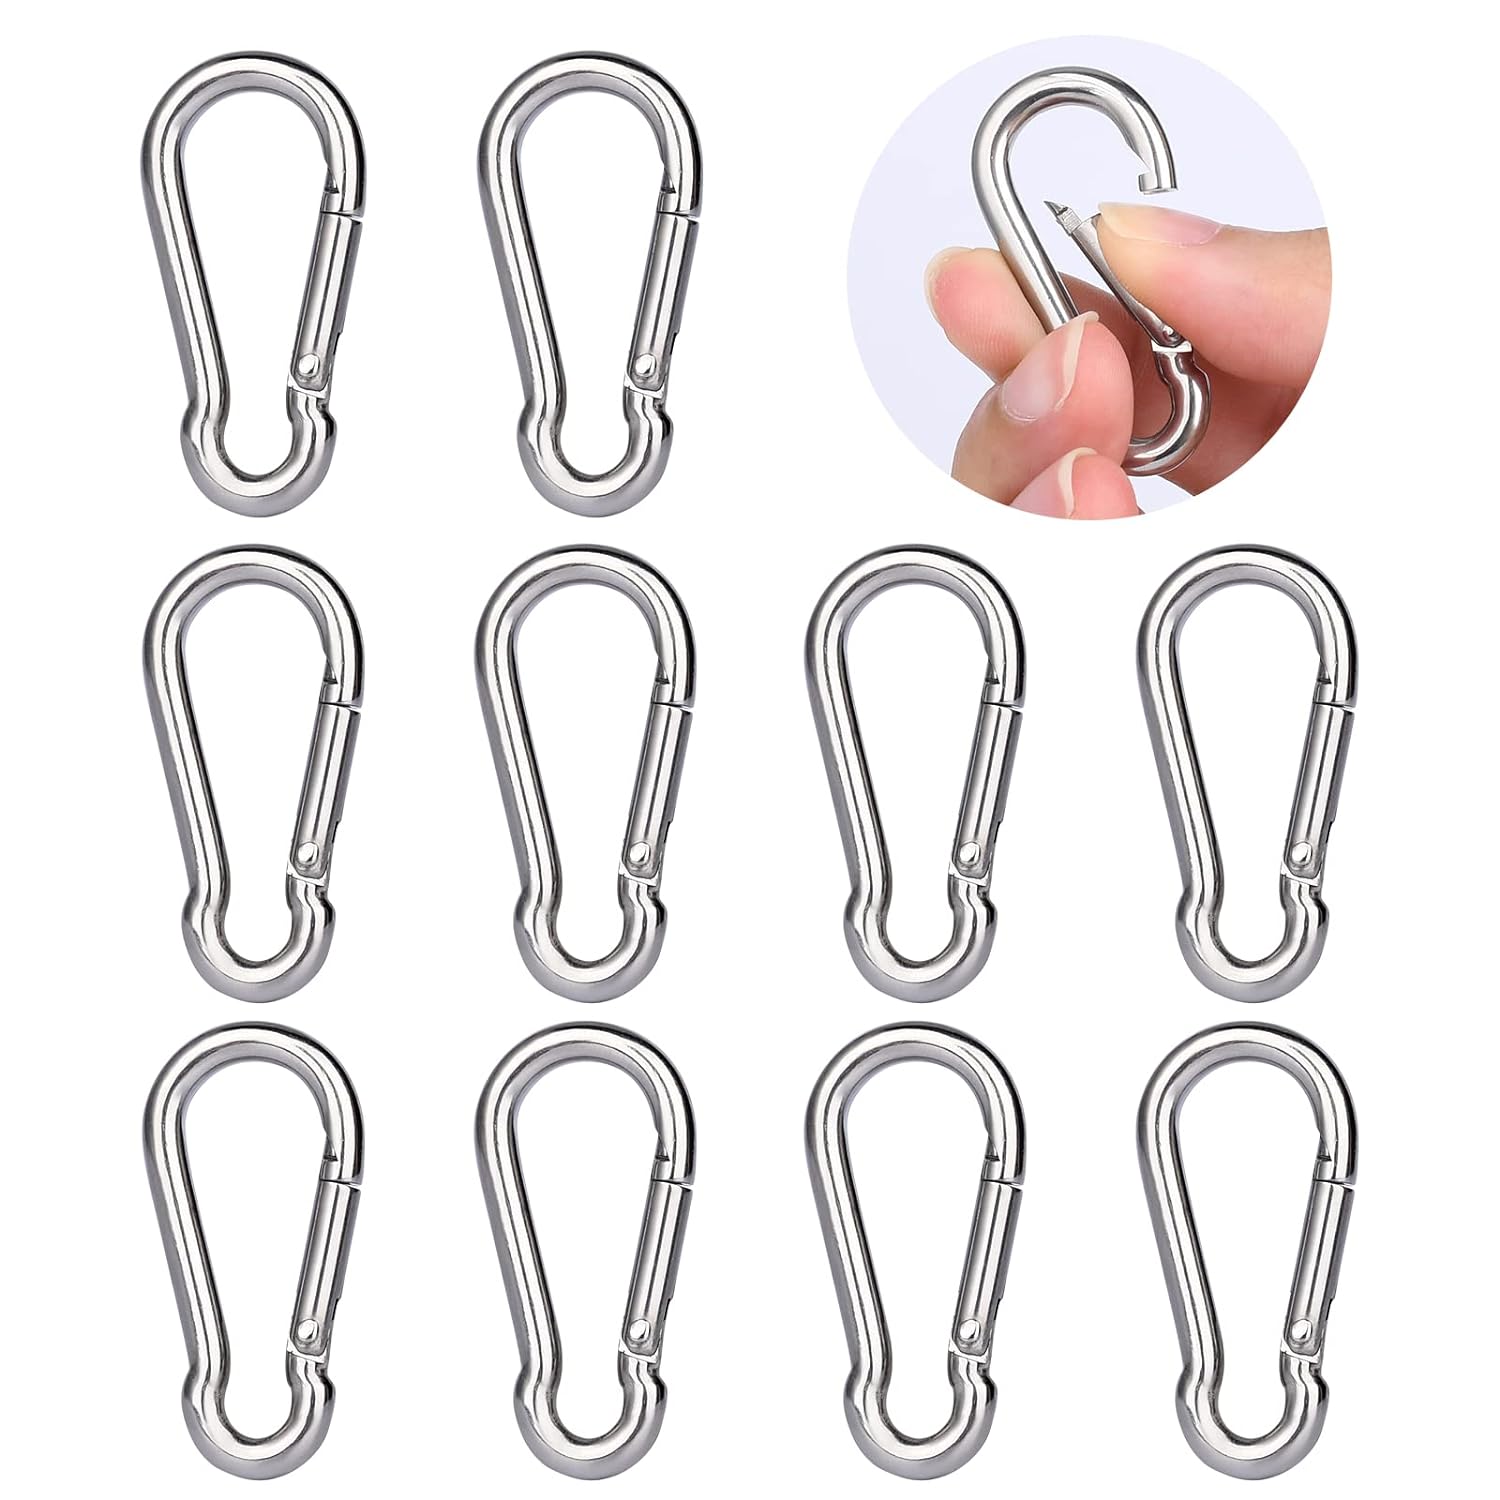 Generic hannger Carabiner Clip - Spring Snap Hook 10 Pcs Stainless Steel 304 Small Carabiner M4 1.6 inch Heavy Duty D Ring Locking Cara